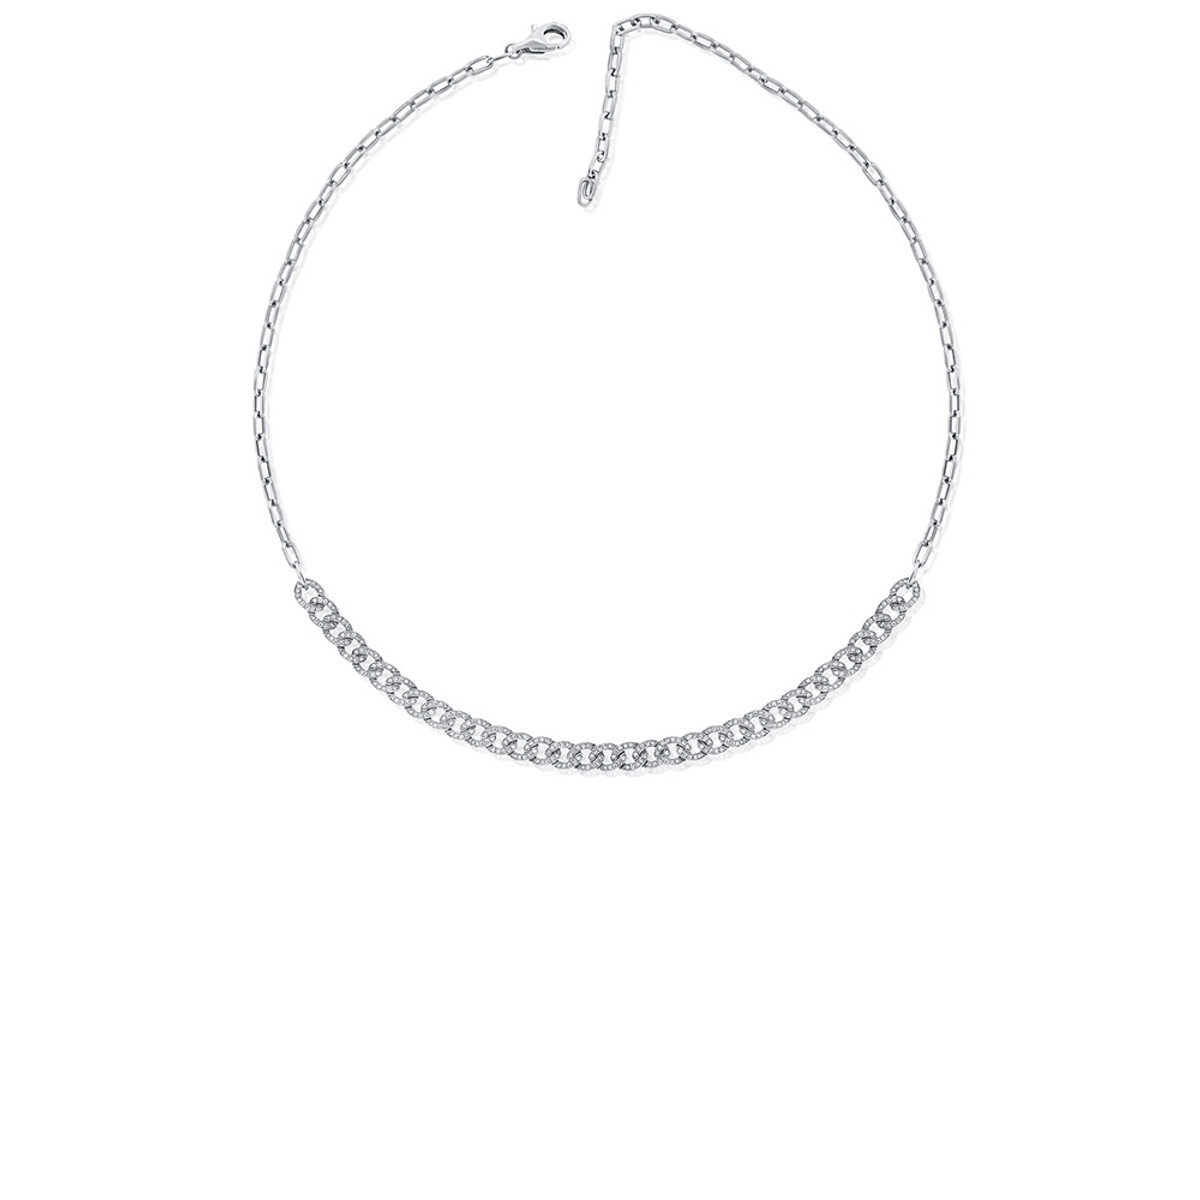 Hyde Park Collection 14K White Gold Diamond Necklace-44546 Product Image